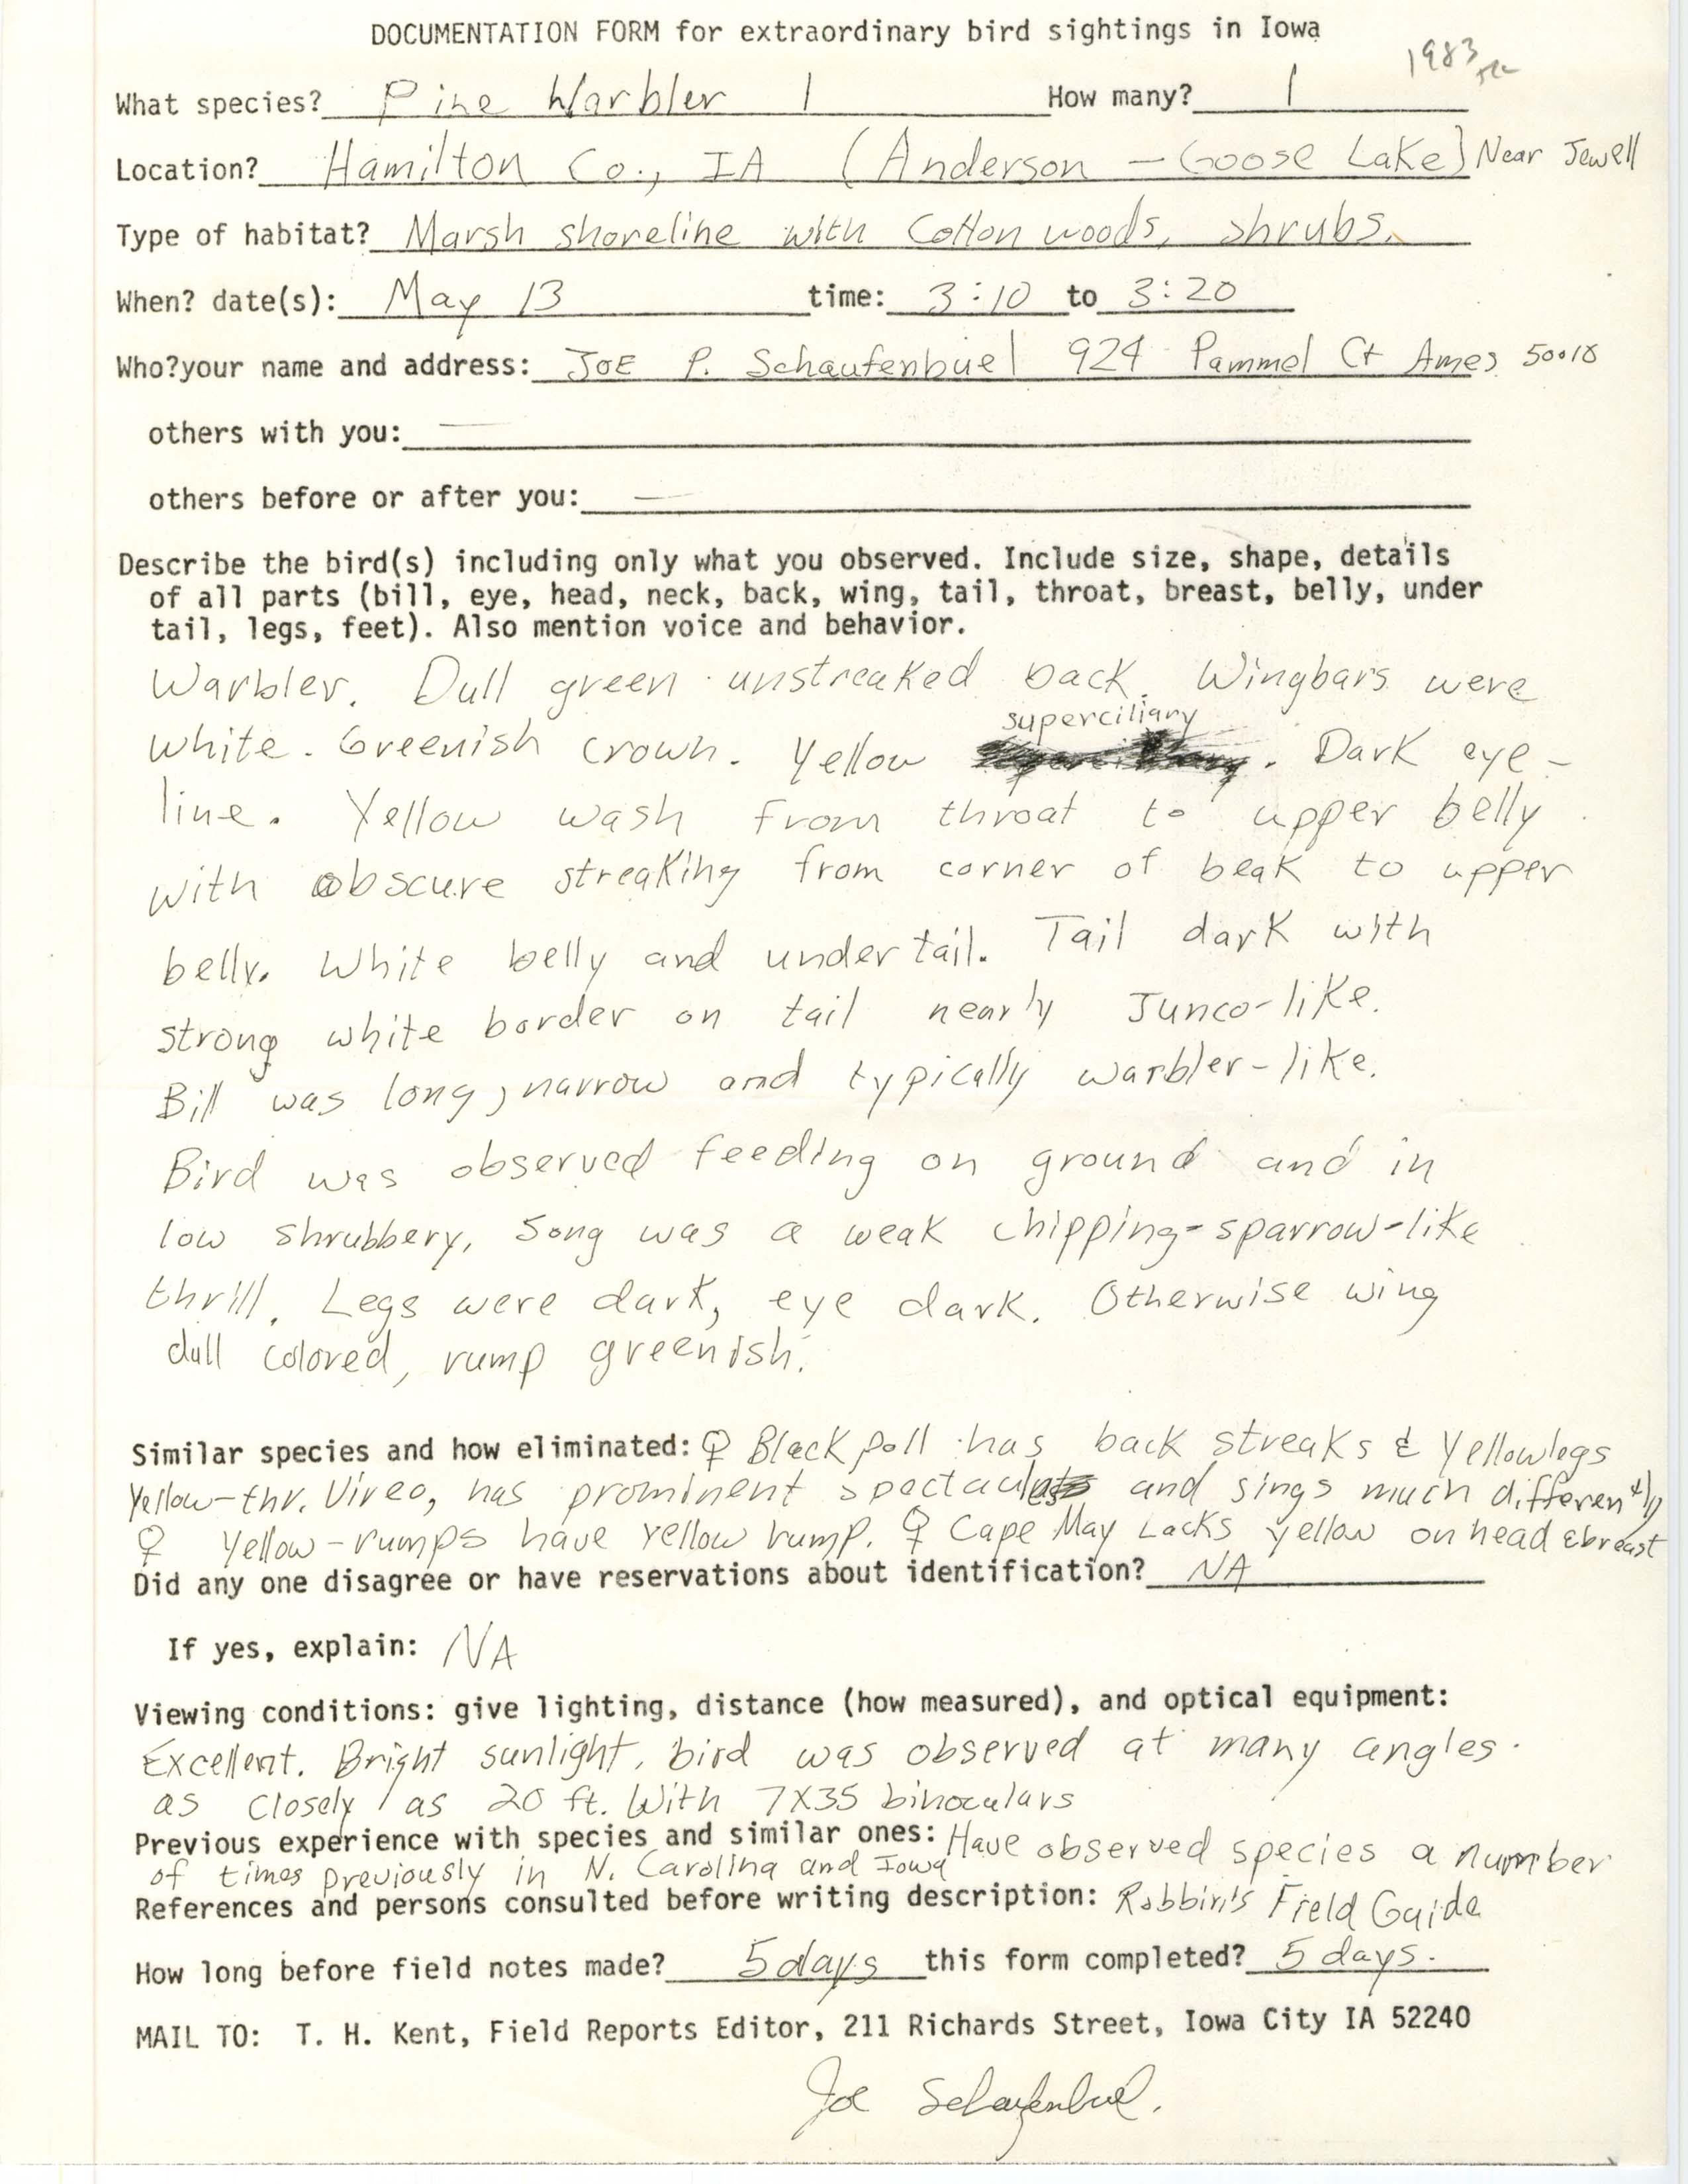 Rare bird documentation form for Pine Warbler at Anderson Goose Lake, 1983